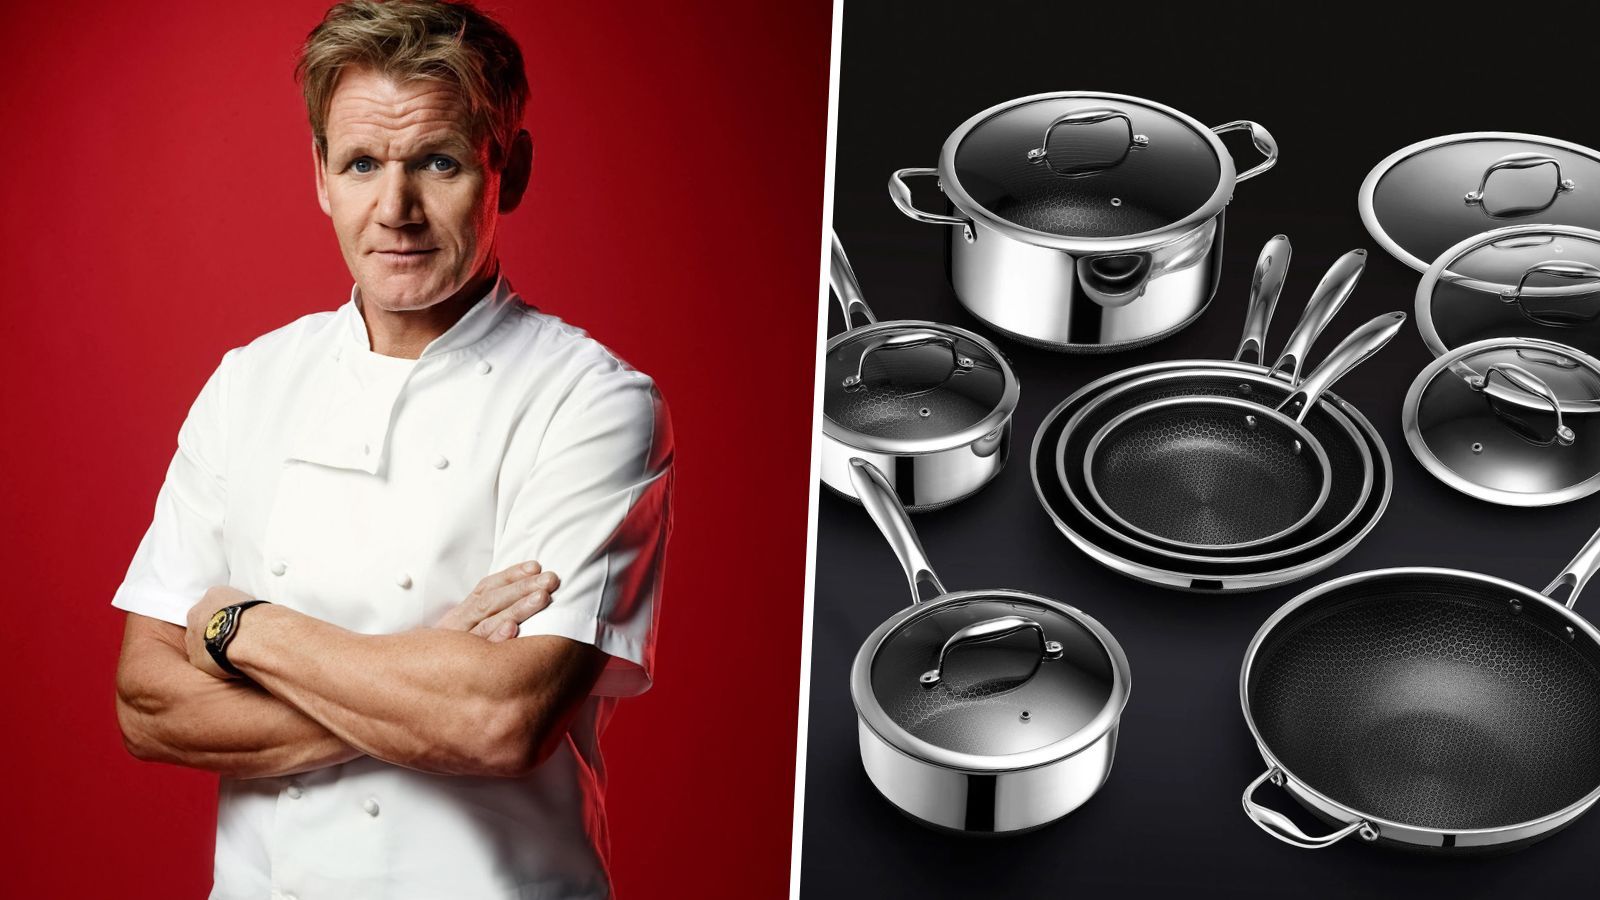 Gordon Ramsay Says These Hybrid Pans Cook to Perfection – Thanks